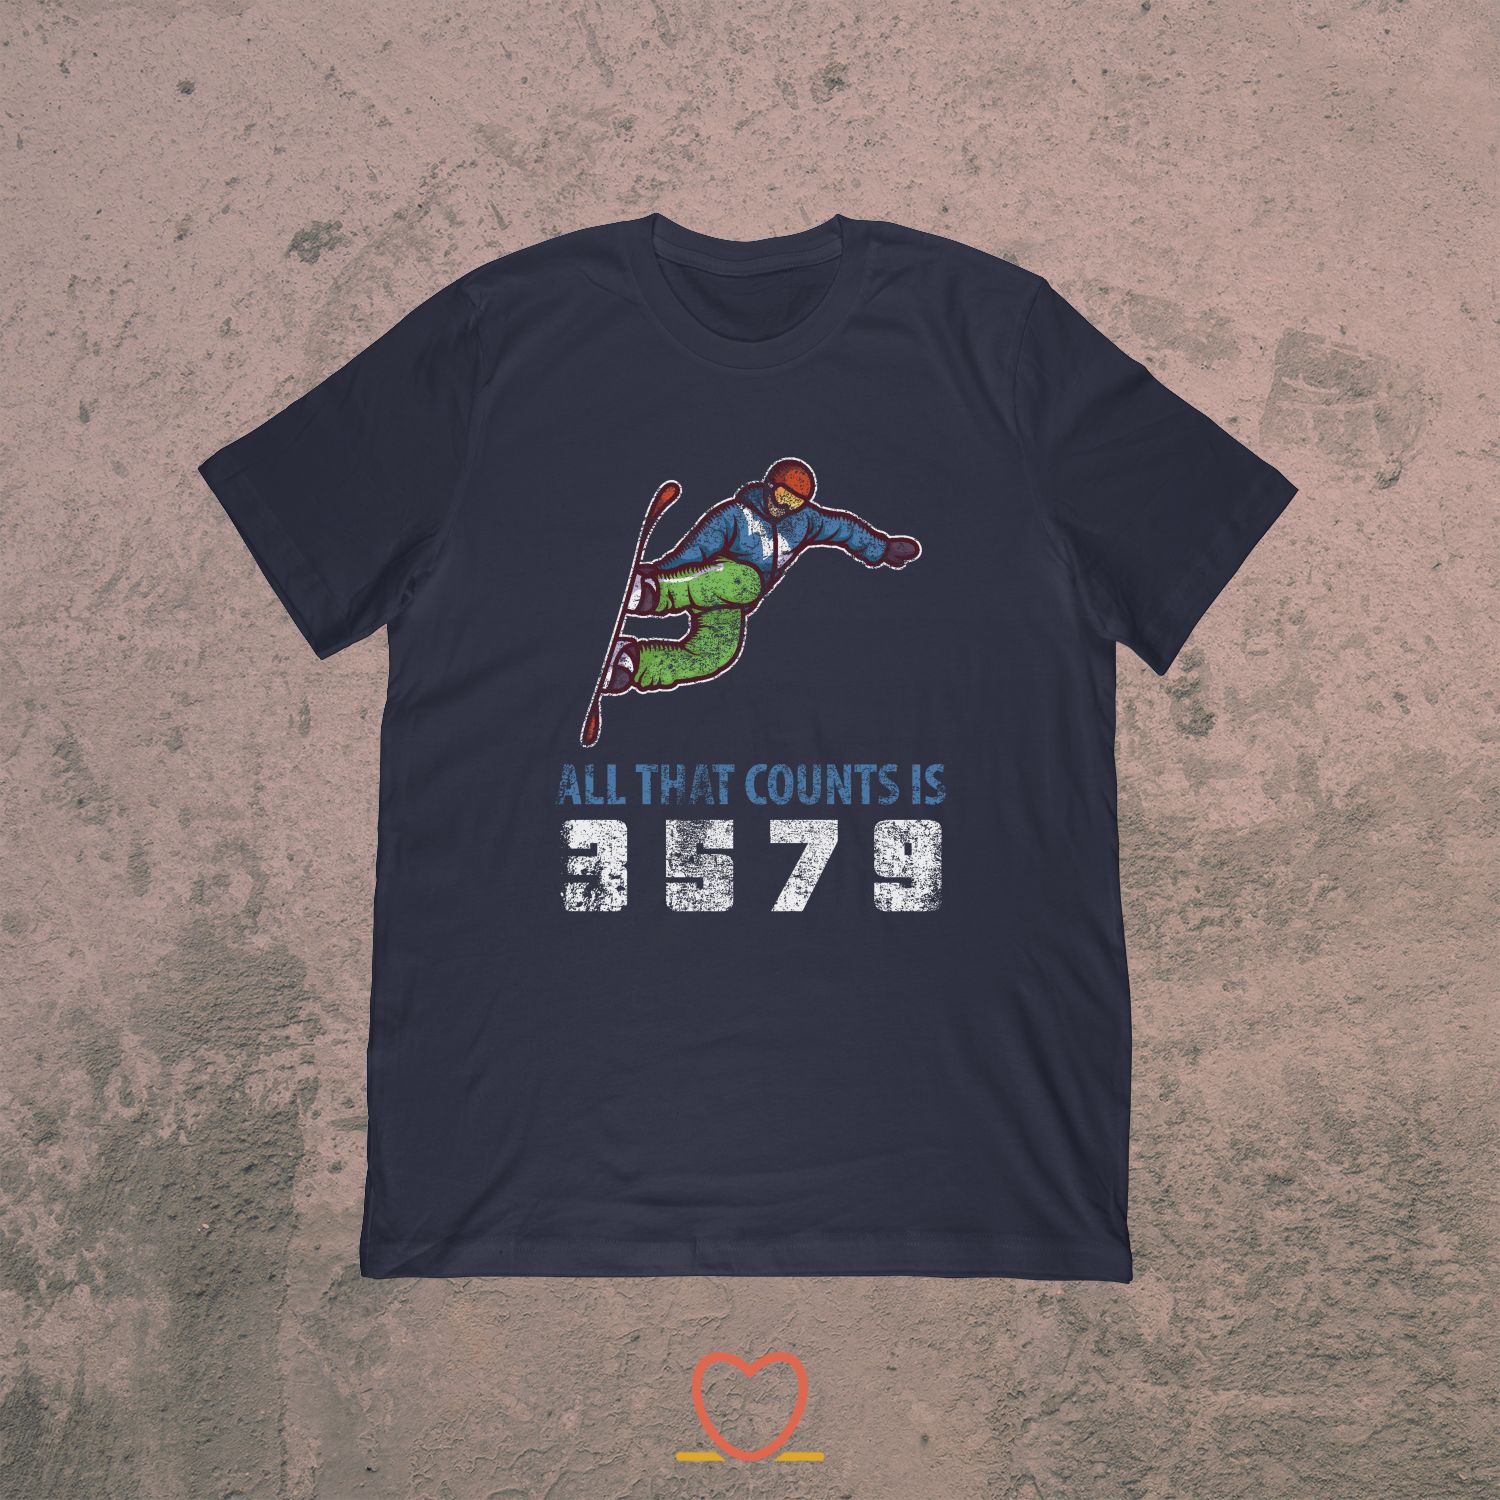 All That Counts Is 3 5 7 9 – Retro Snowboard Tee